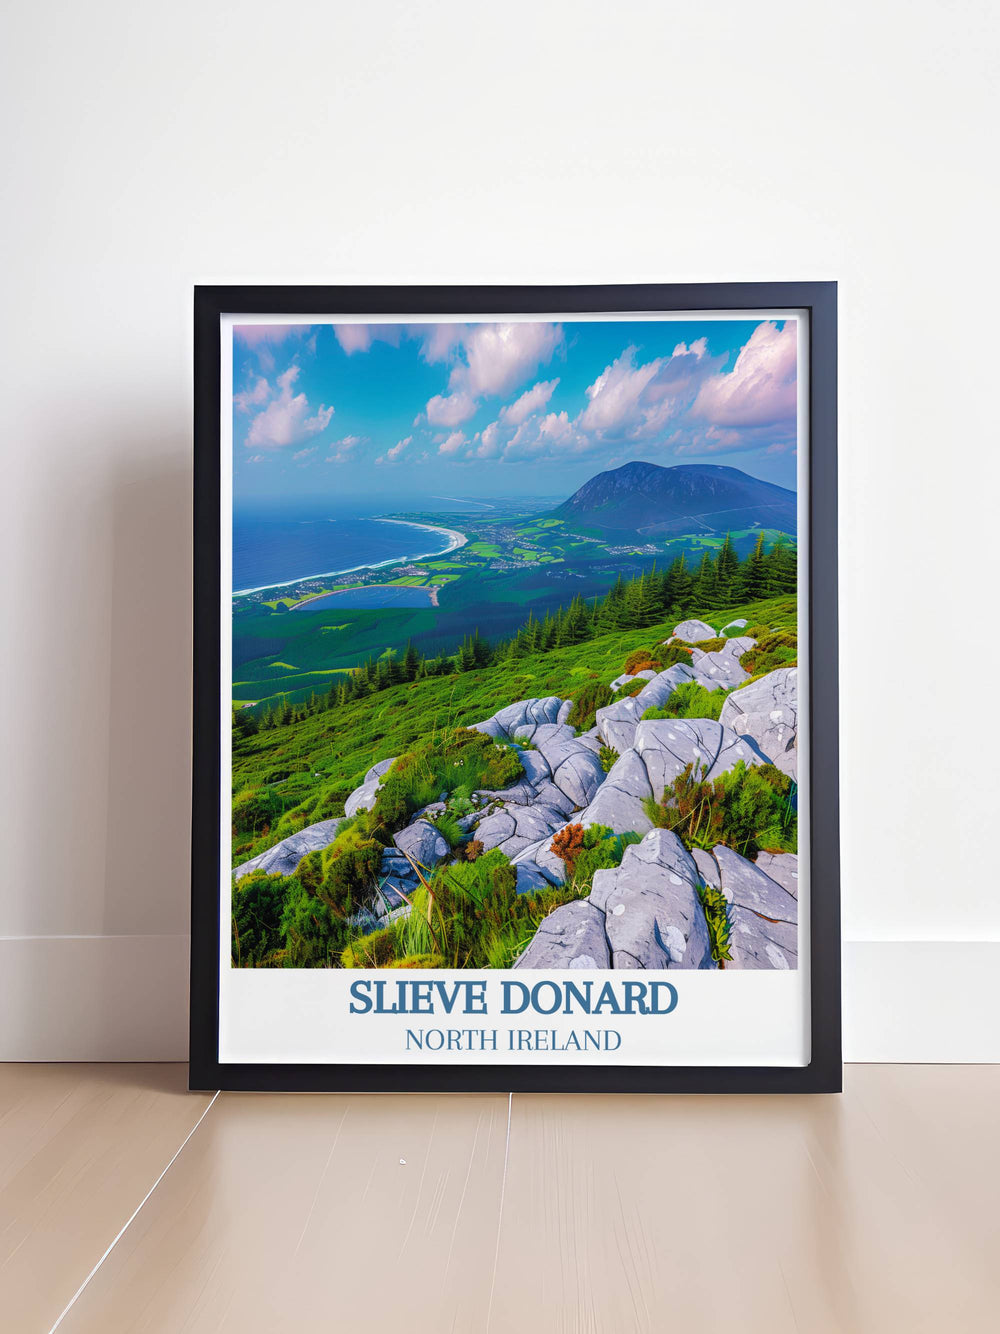 Northern Ireland prints feature the serene landscapes of the Mourne Mountains, with Slieve Donard as the centerpiece. The lush greenery and rugged terrains are depicted in stunning detail, making it a perfect addition to any space that seeks to capture natural beauty.